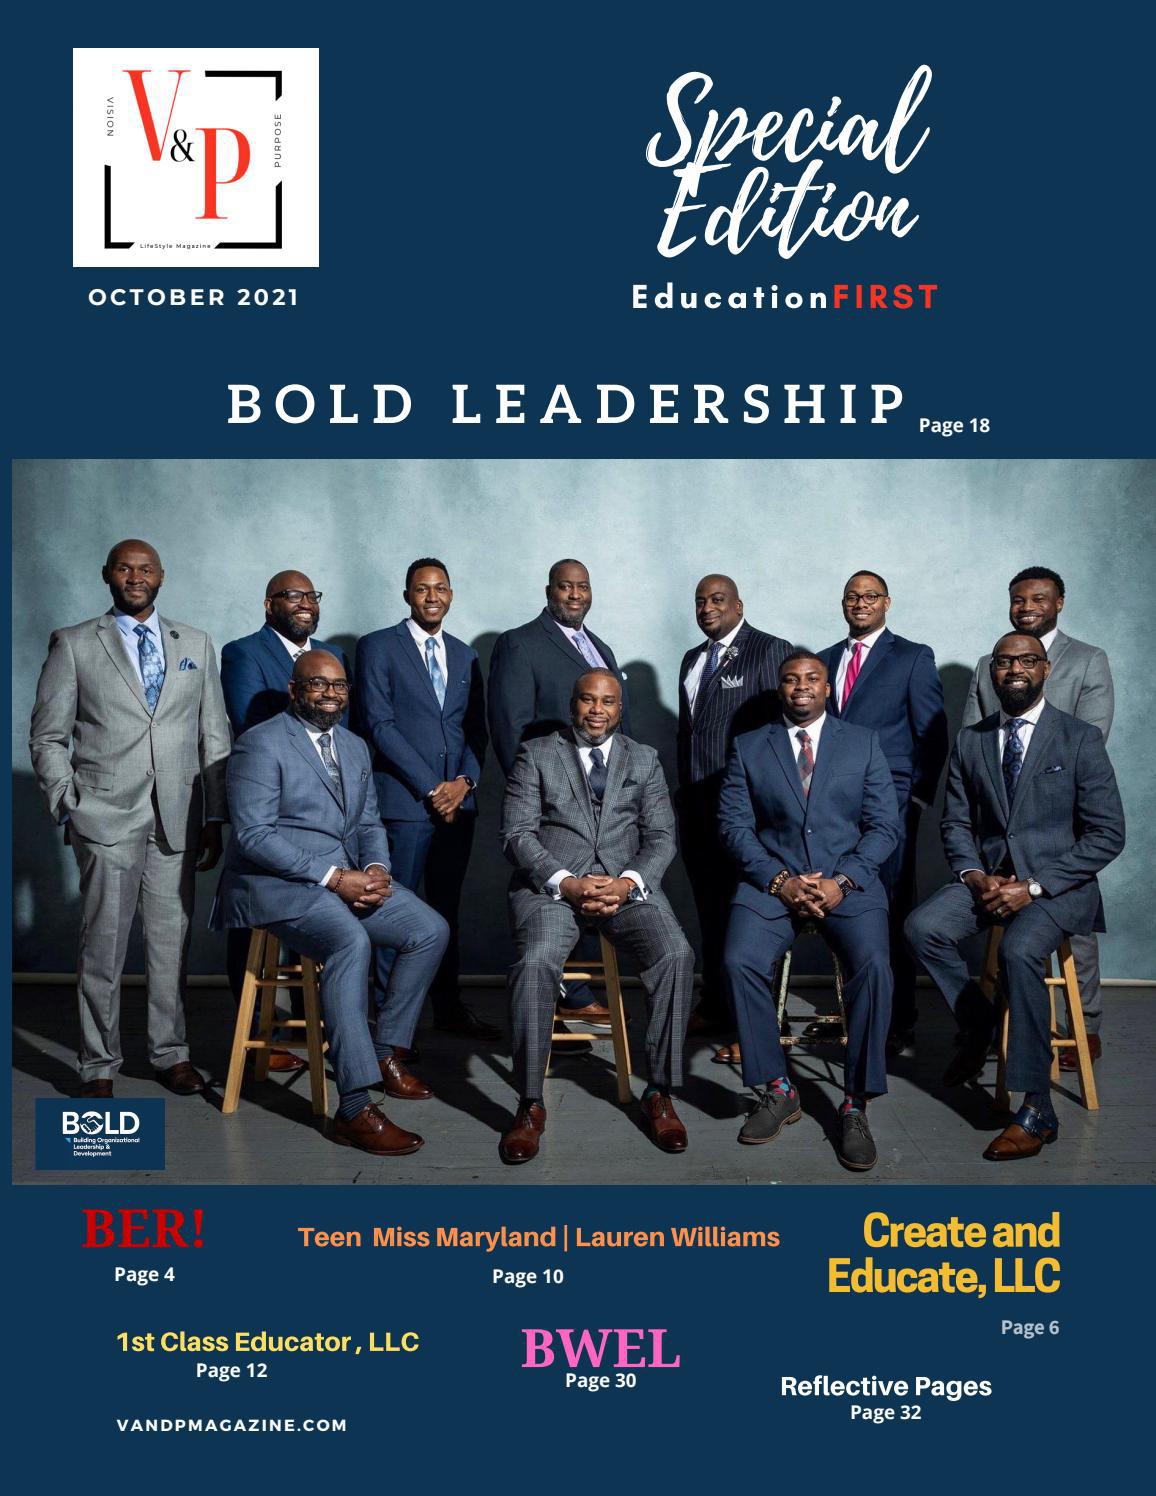 V&P LifeStyle Magazine October 2021 EducationFIRST Special Edition